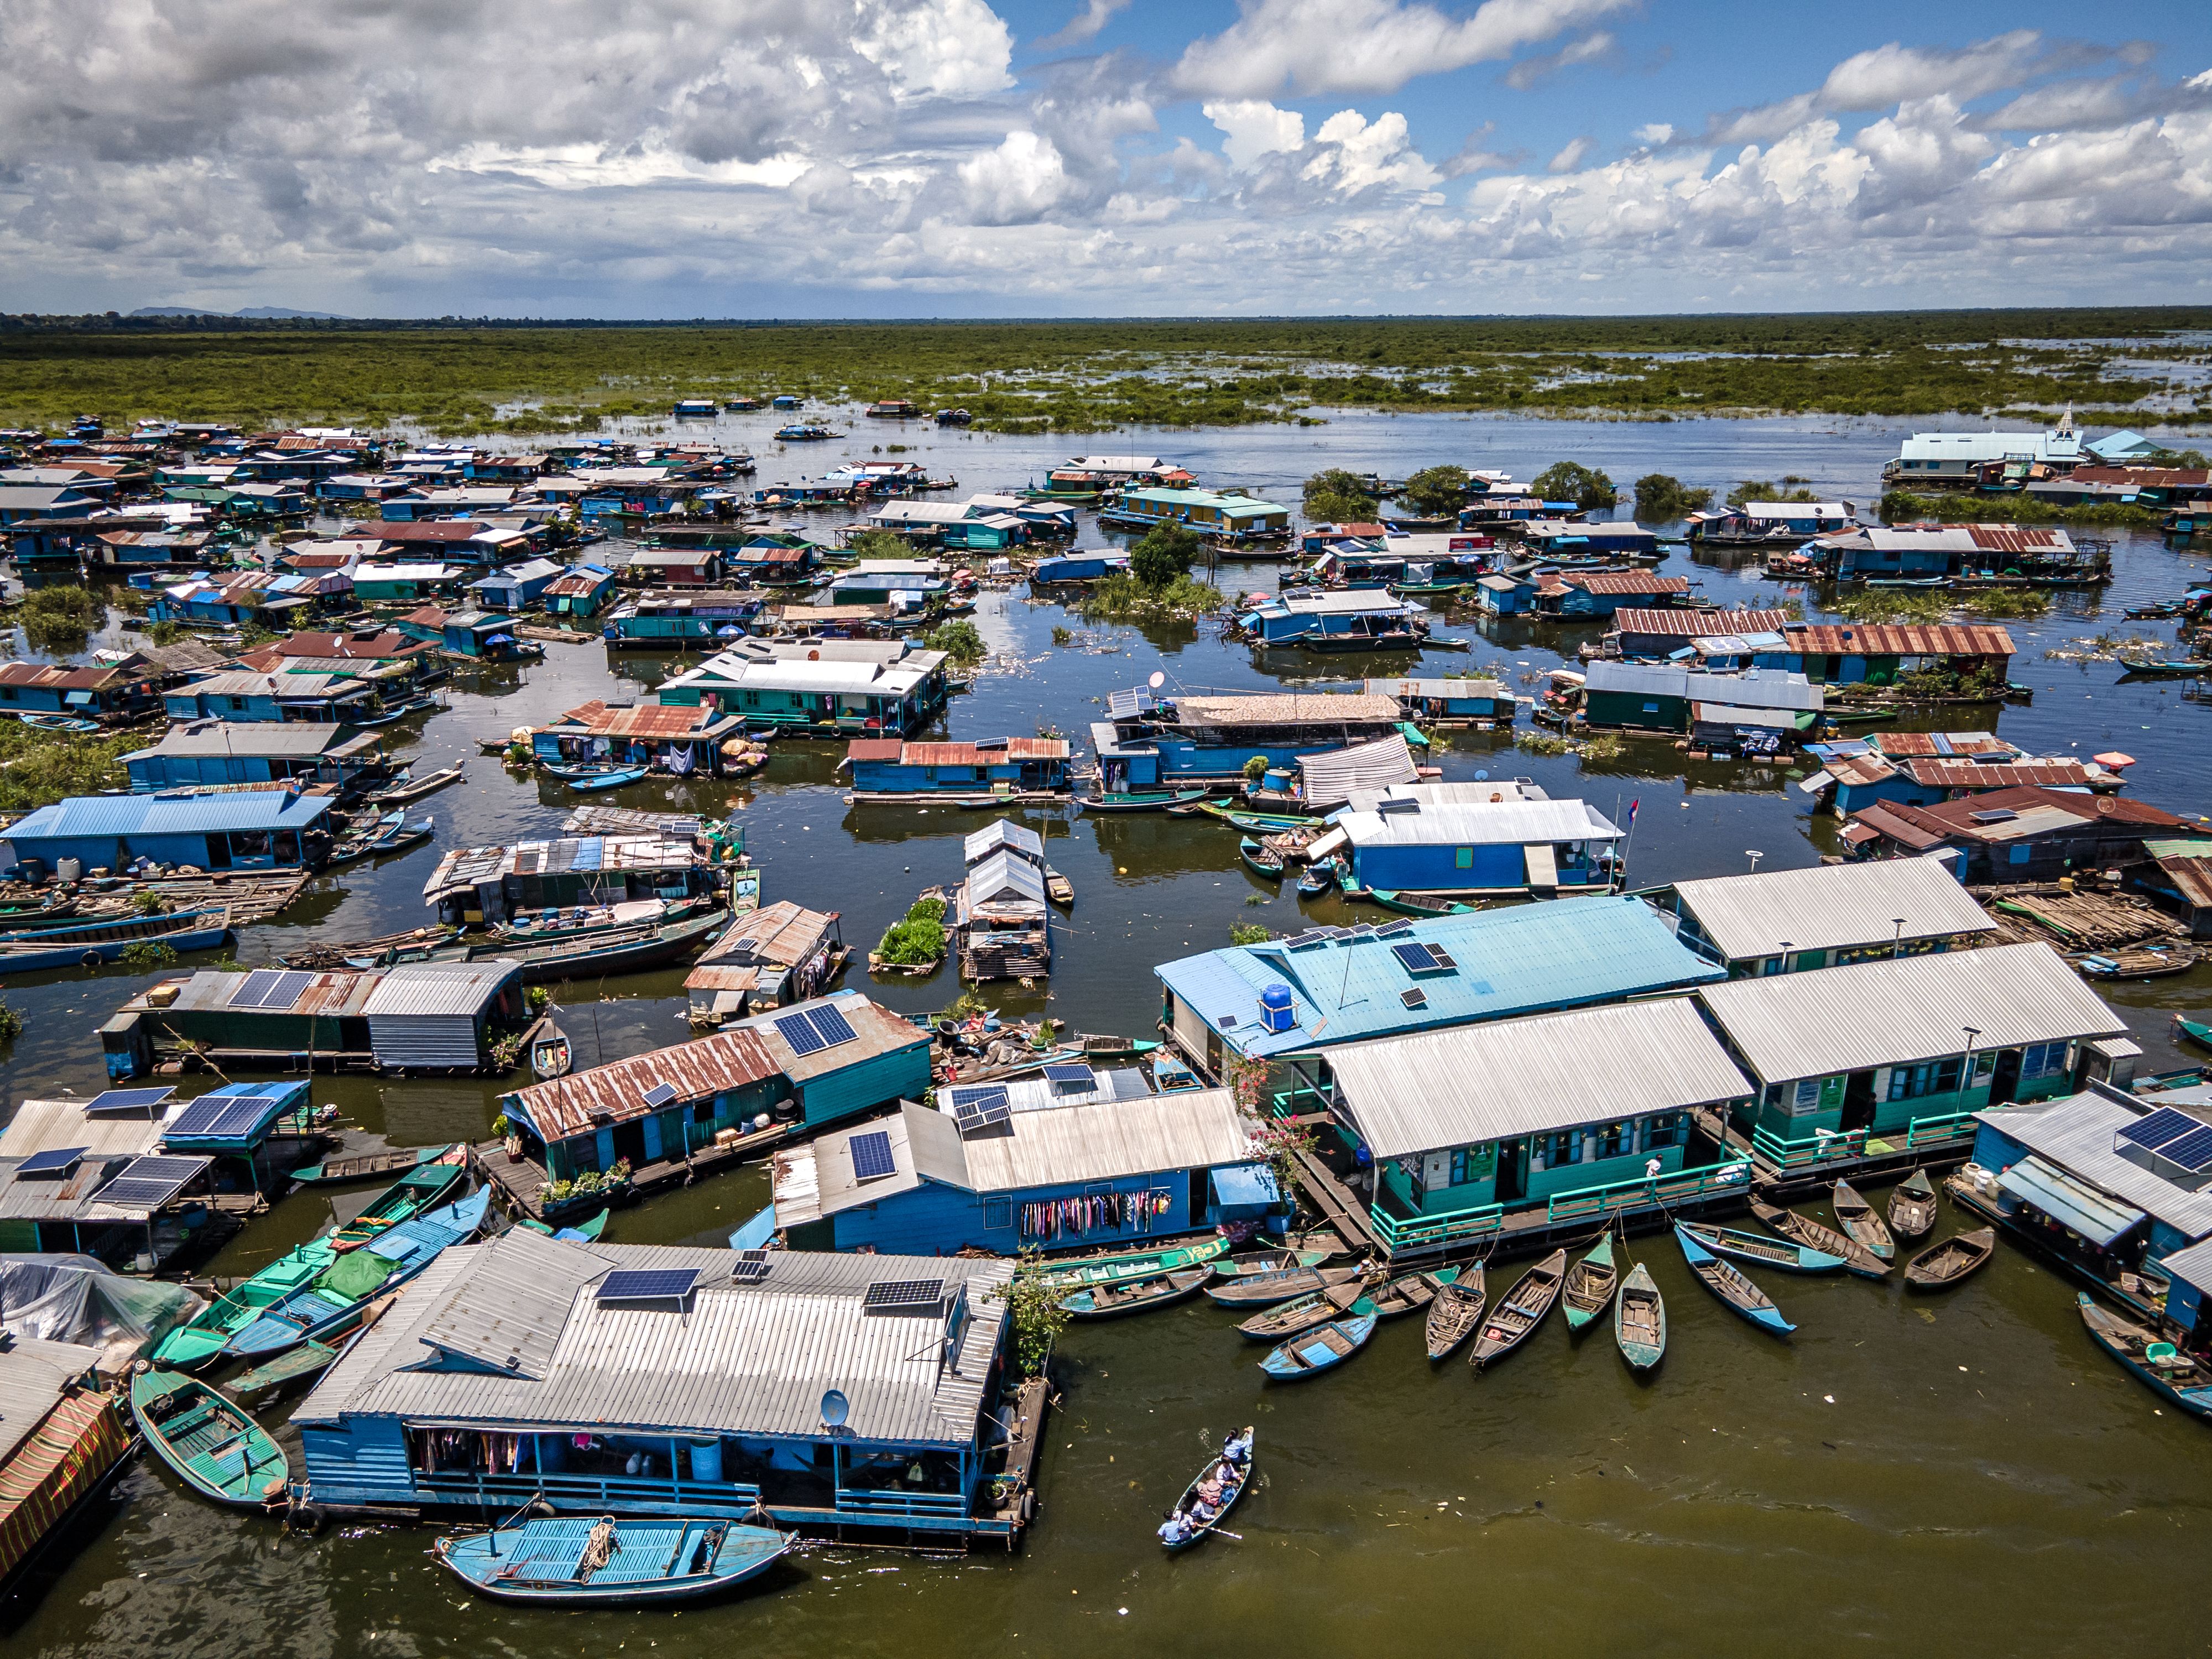 An aerial view of Ratana’s school on Tonle Sap Lake, Cambodia.